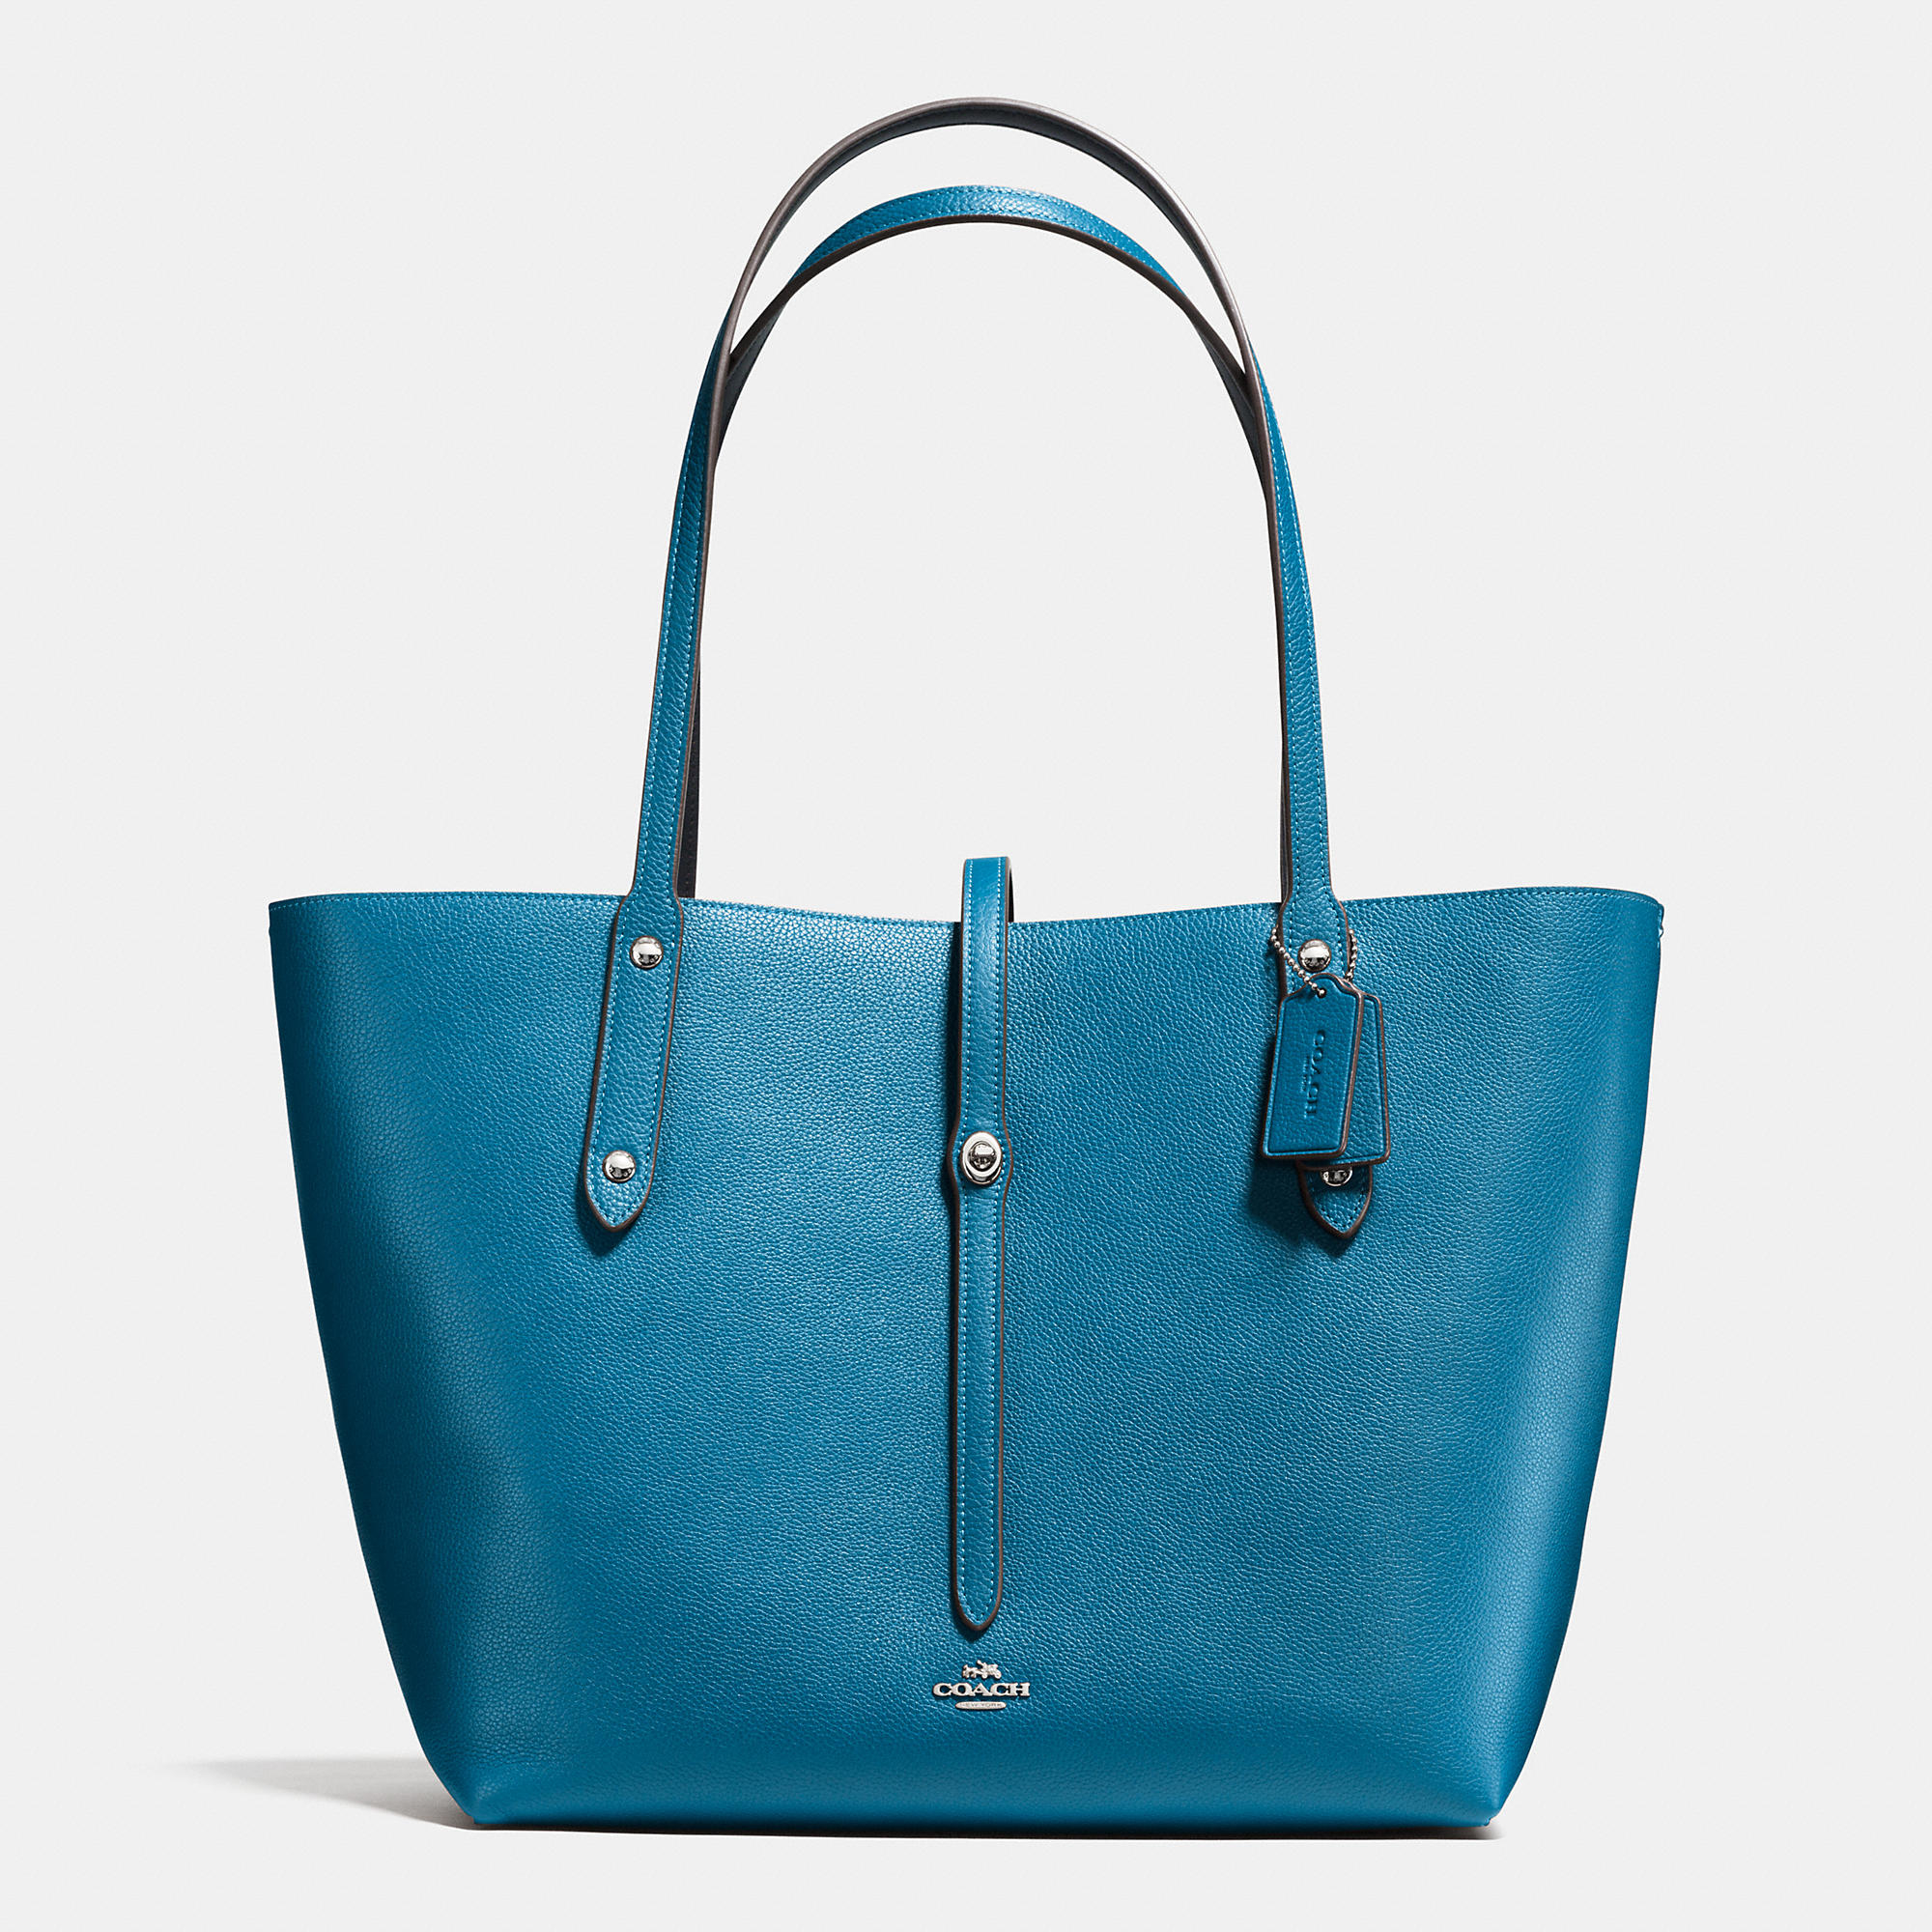 Coach Market Tote In Refined Pebble Leather in Teal (SILVER/PEACOCK ...